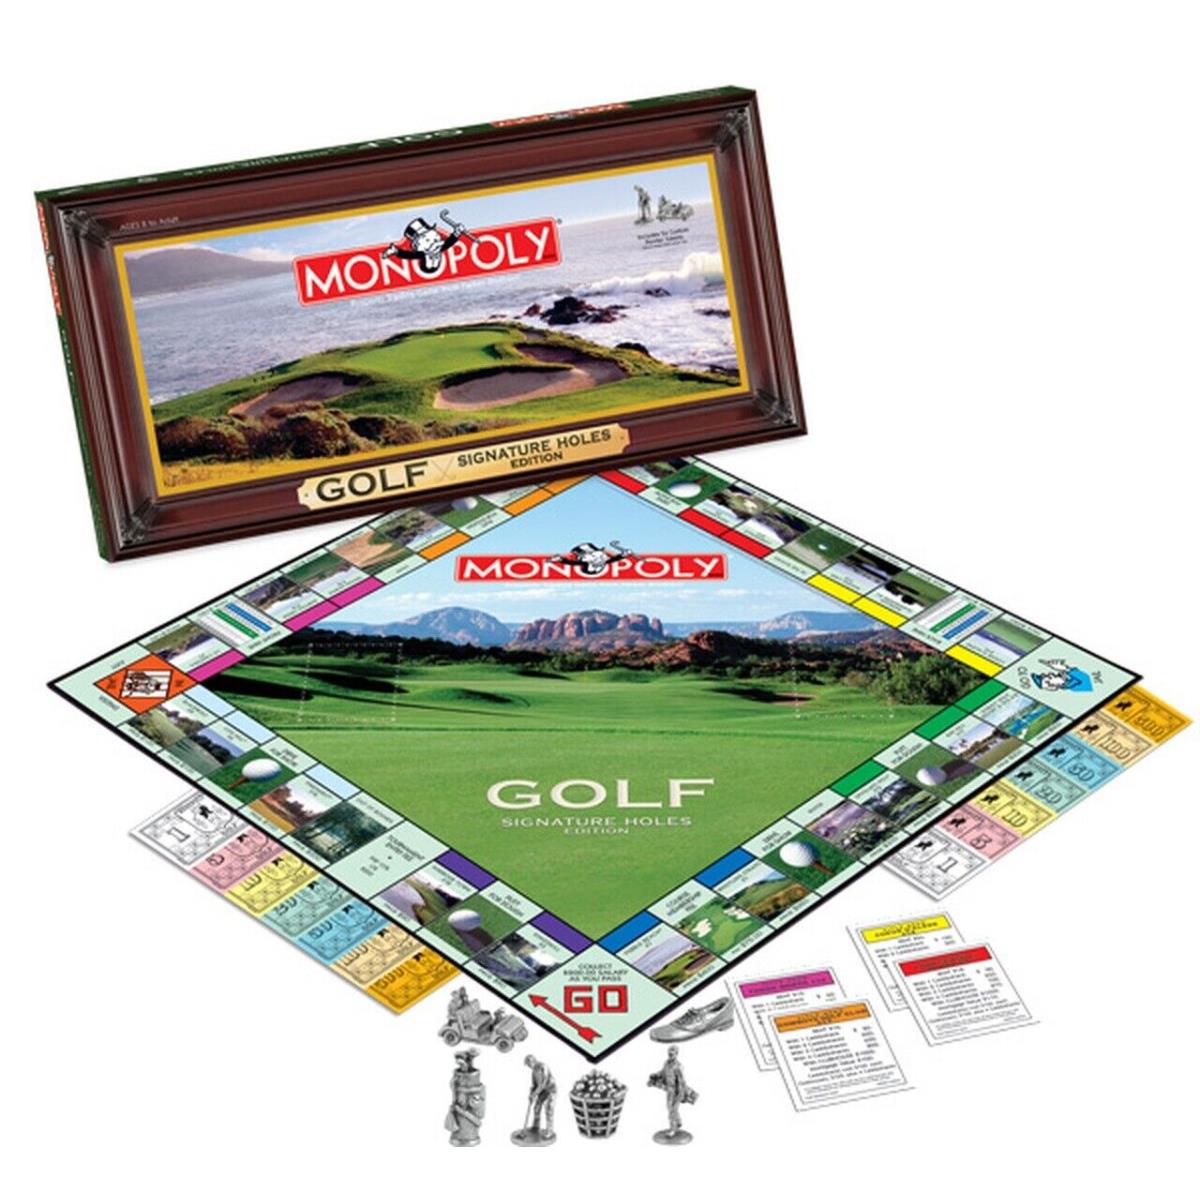 Monopoly - Gold Signature Holes Edition - Board Game